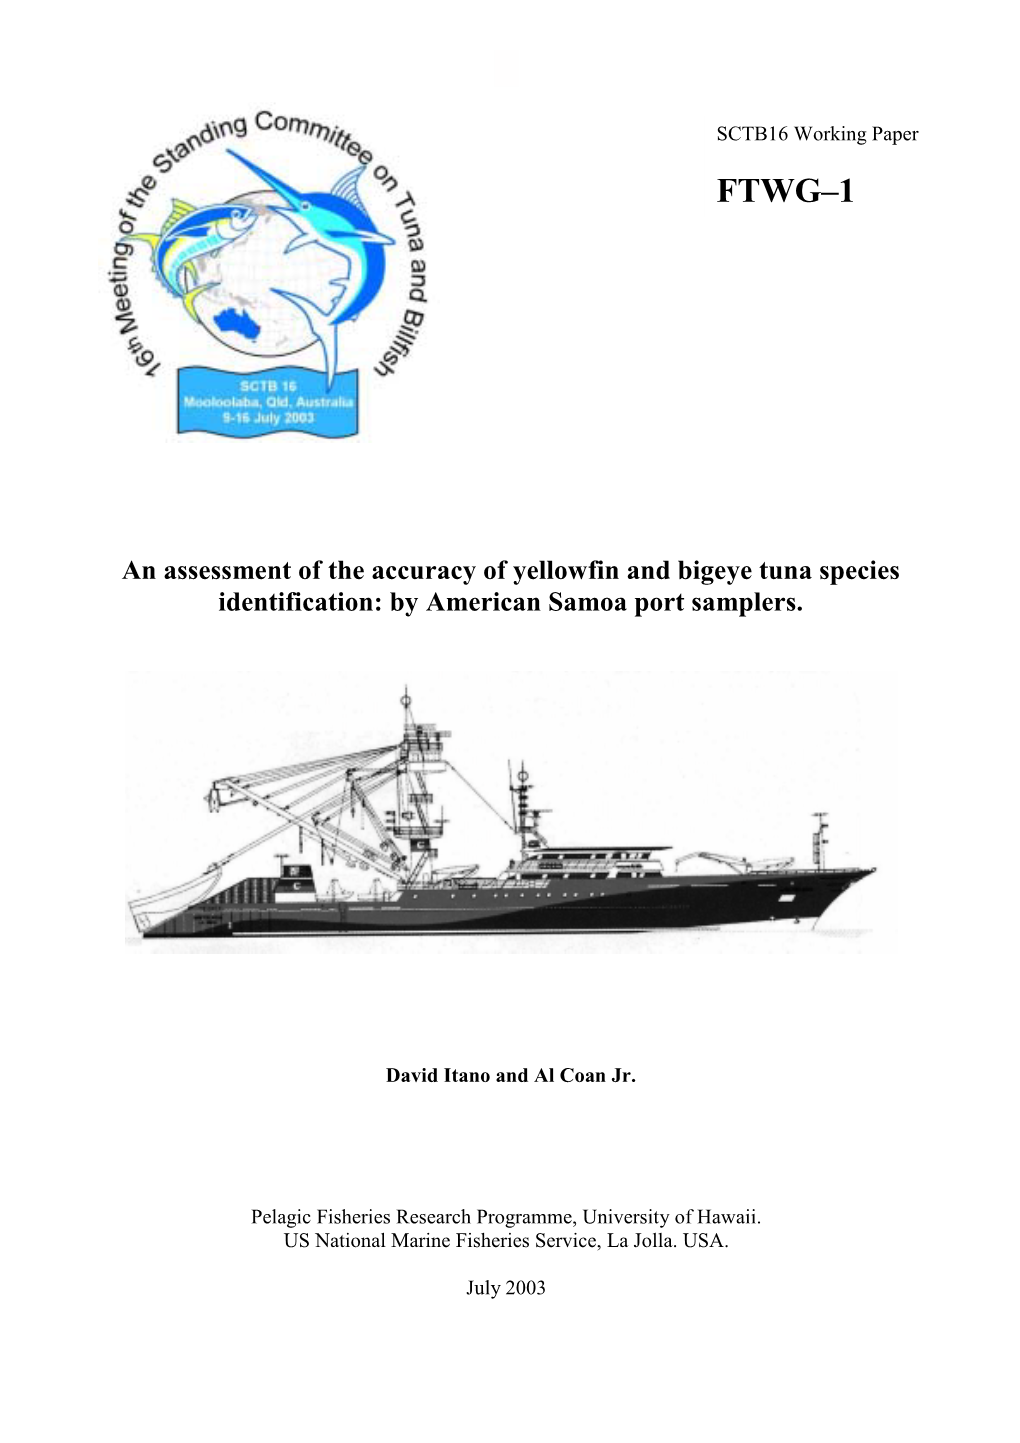 An Assessment of the Accuracy of Yellowfin and Bigeye Tuna Species Identification: by American Samoa Port Samplers